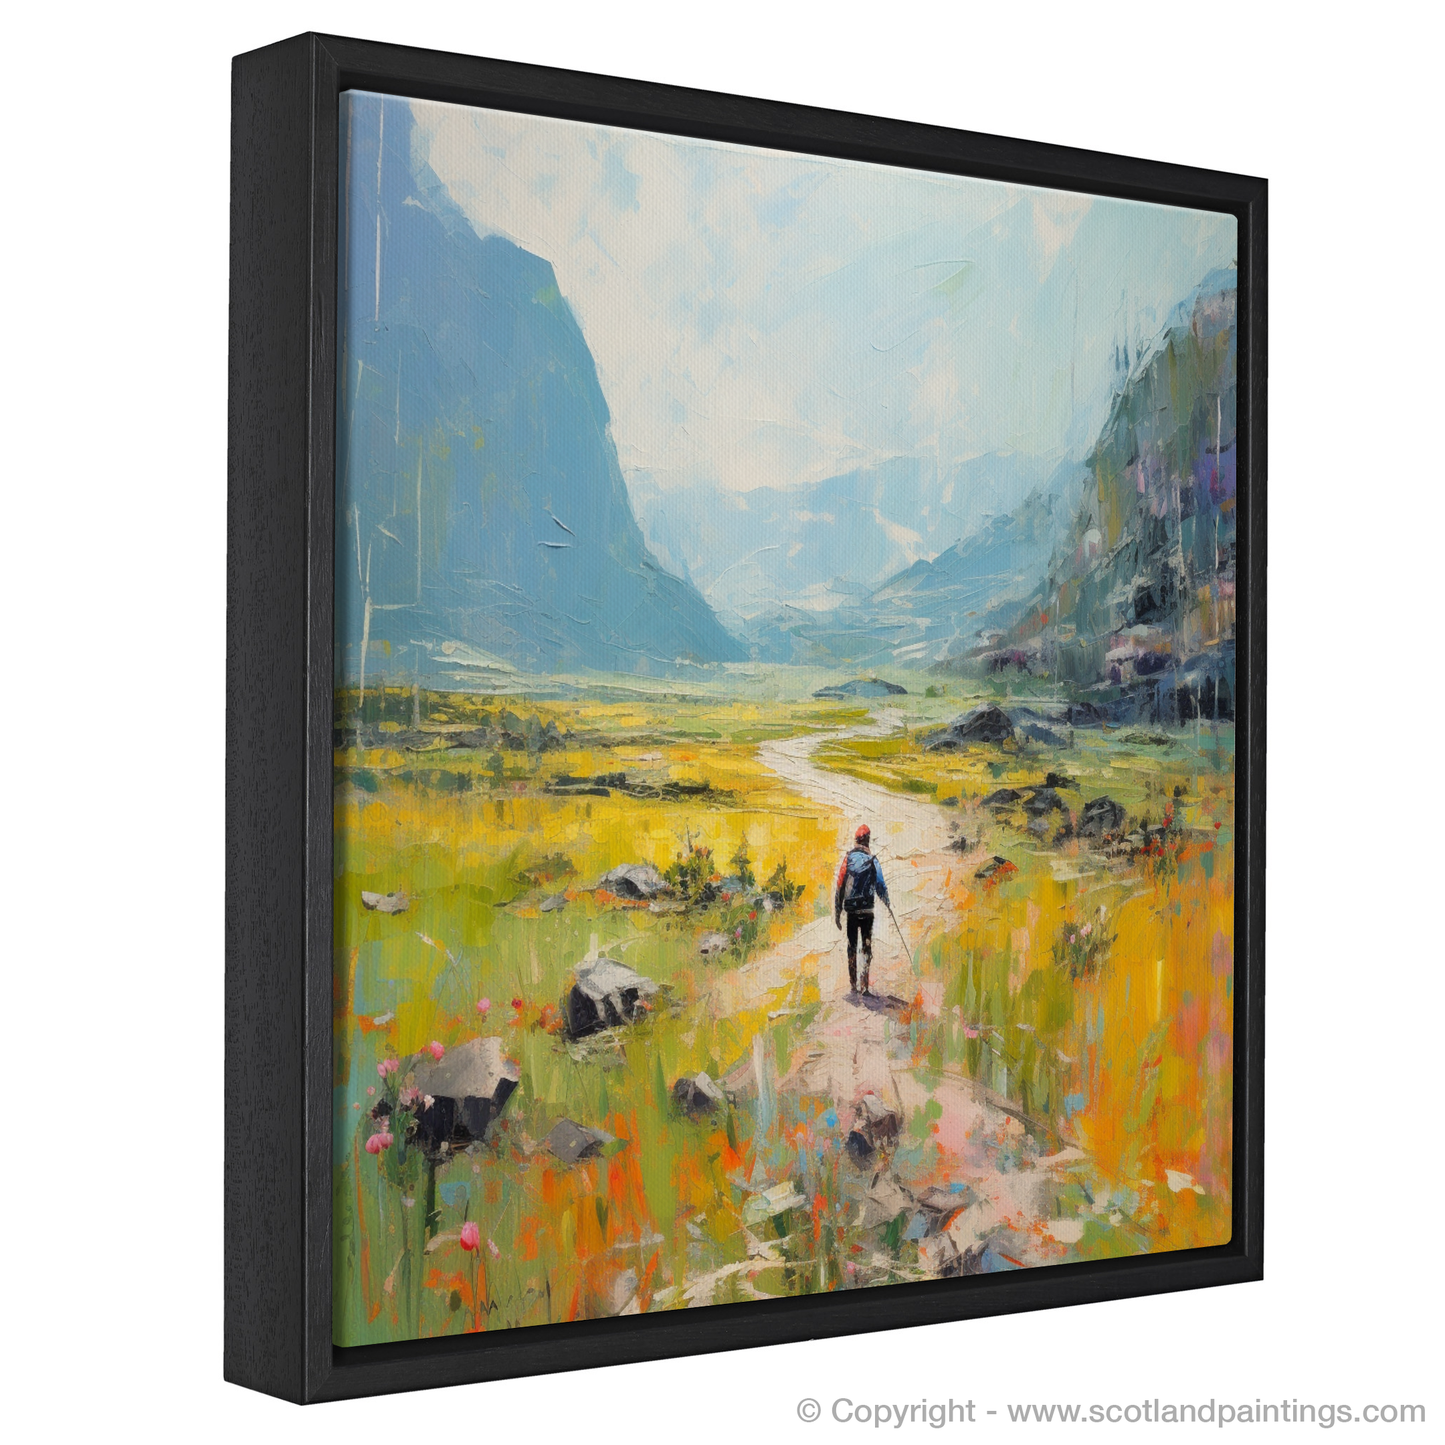 Painting and Art Print of Lone hiker in Glencoe during summer entitled "Highland Wanderer: A Summer Odyssey in Glencoe".